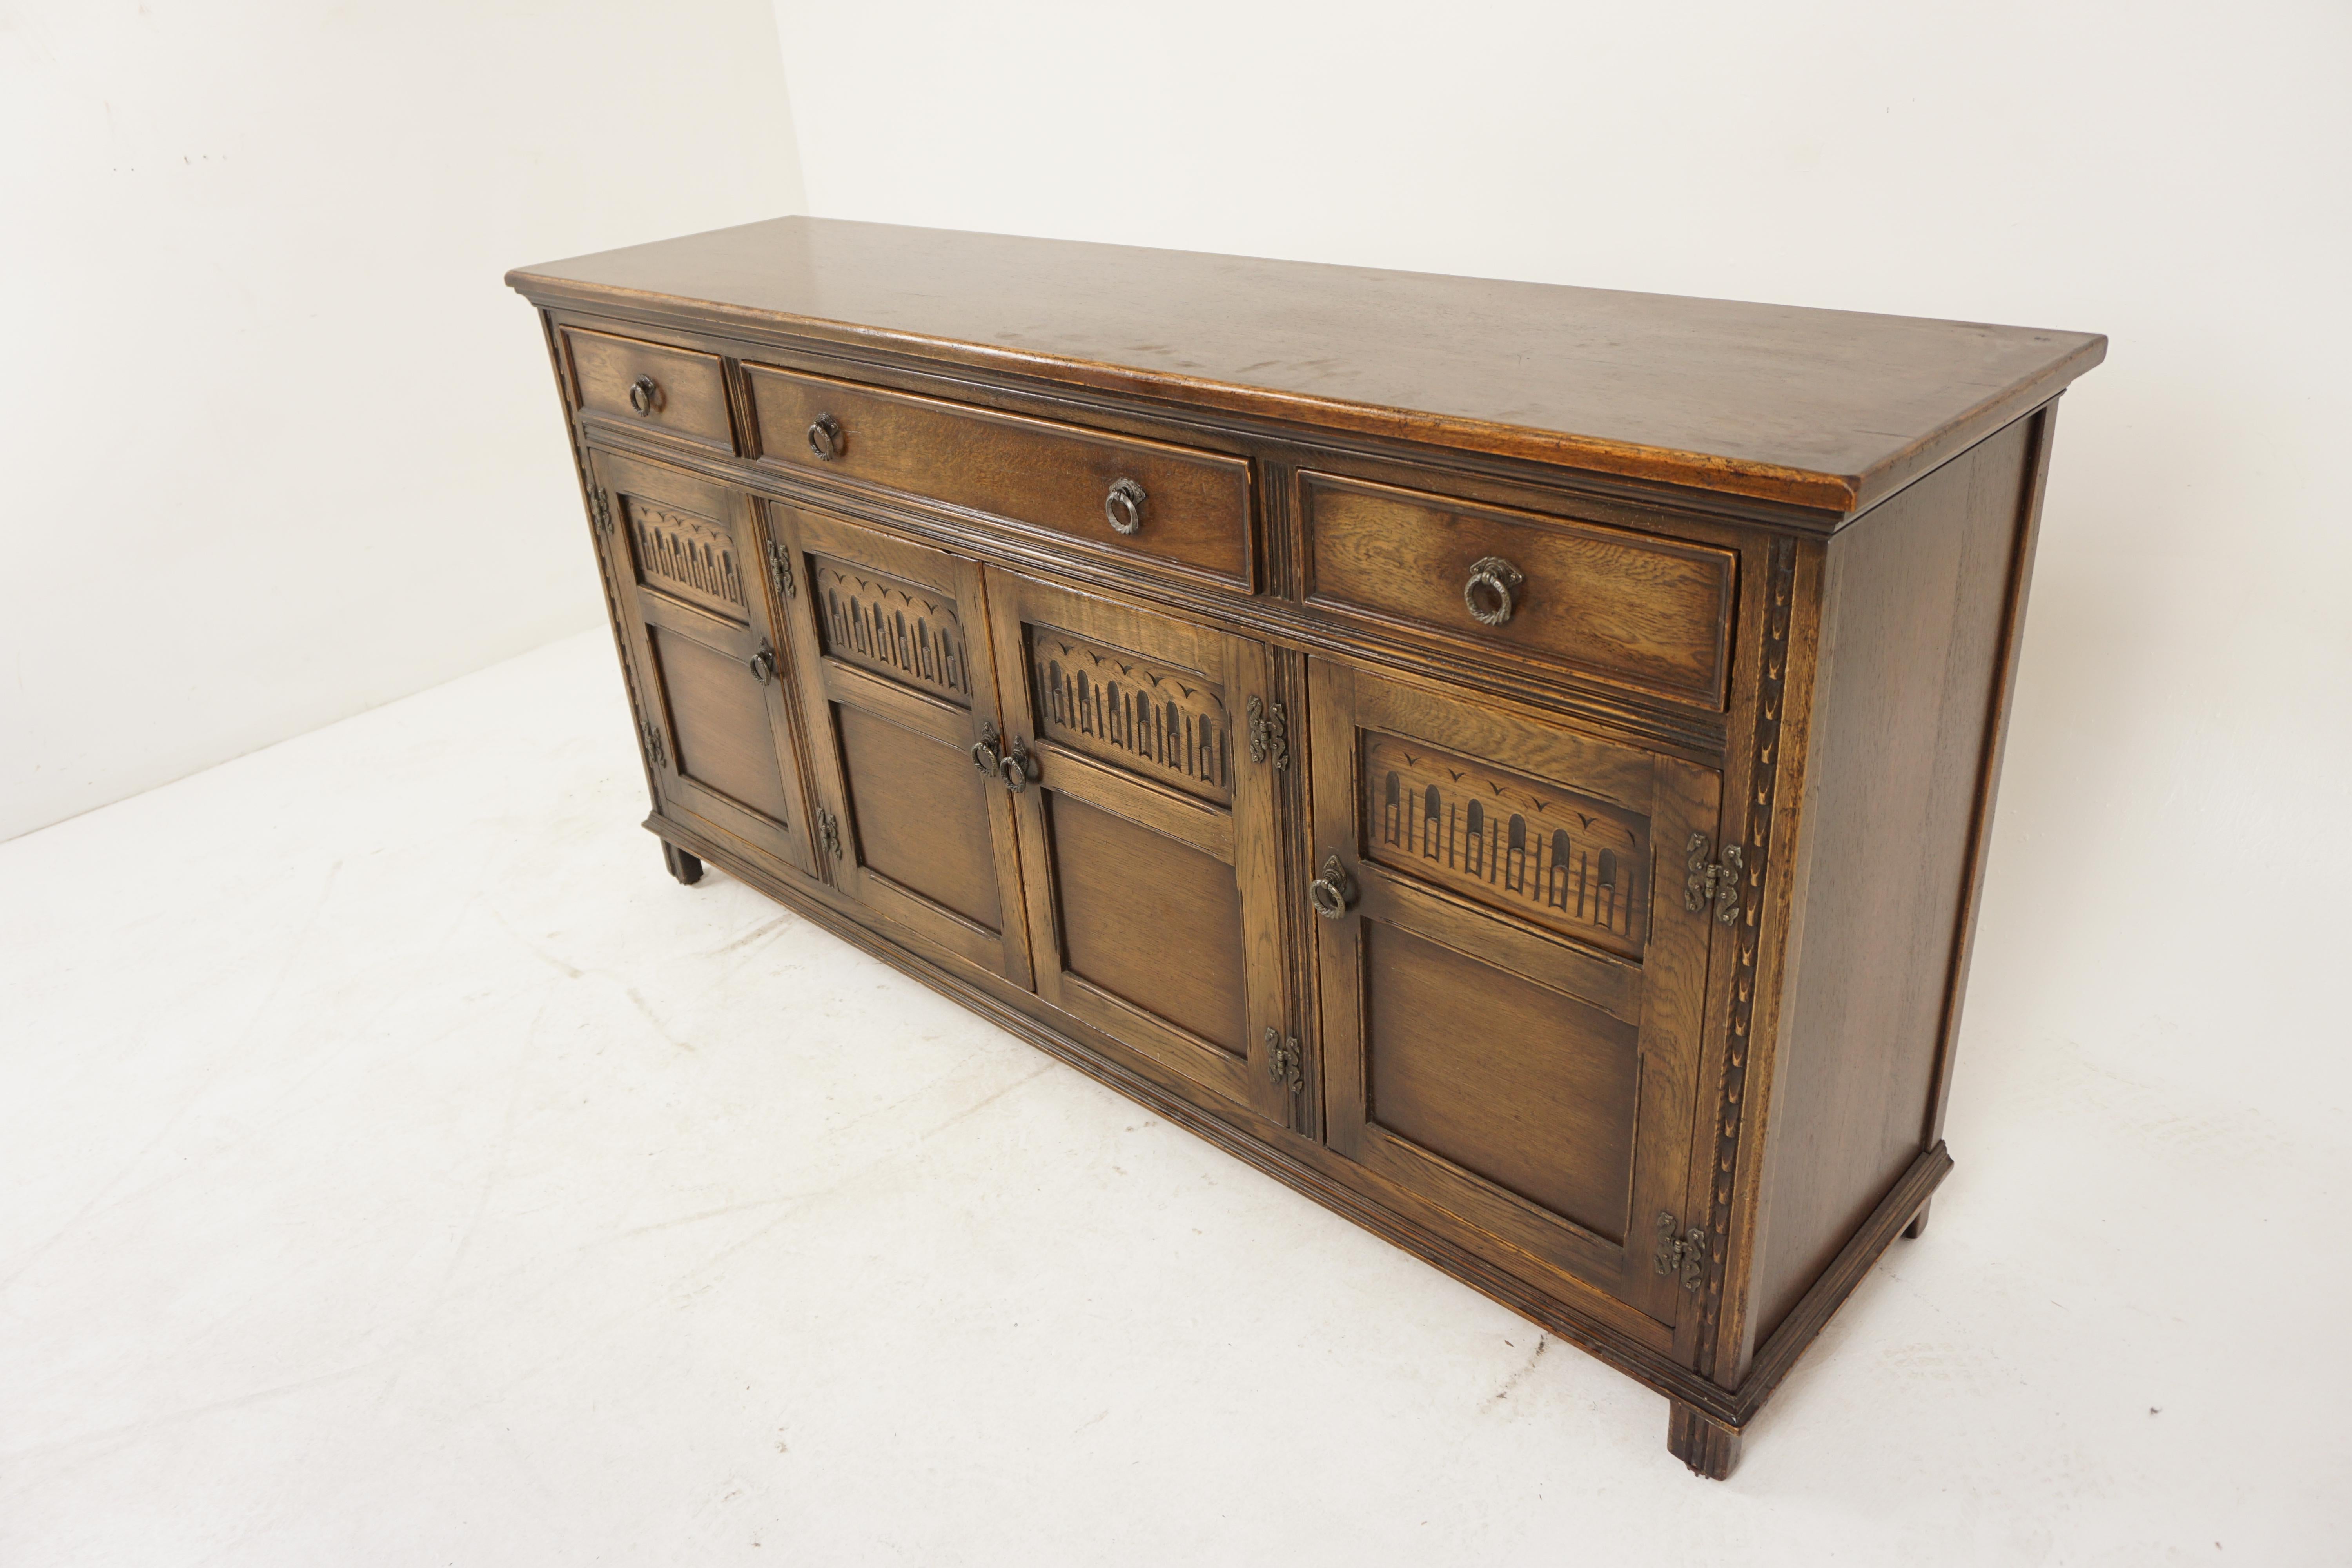 Vintage Carved Oak Sideboard Buffet Console, Scotland 1940, H1154

Solid Oak
Original finish
Rectangular moulded top
Two short and one long drawer underneath with original handles
Four carved panelled doors open to reveal single shelves in all